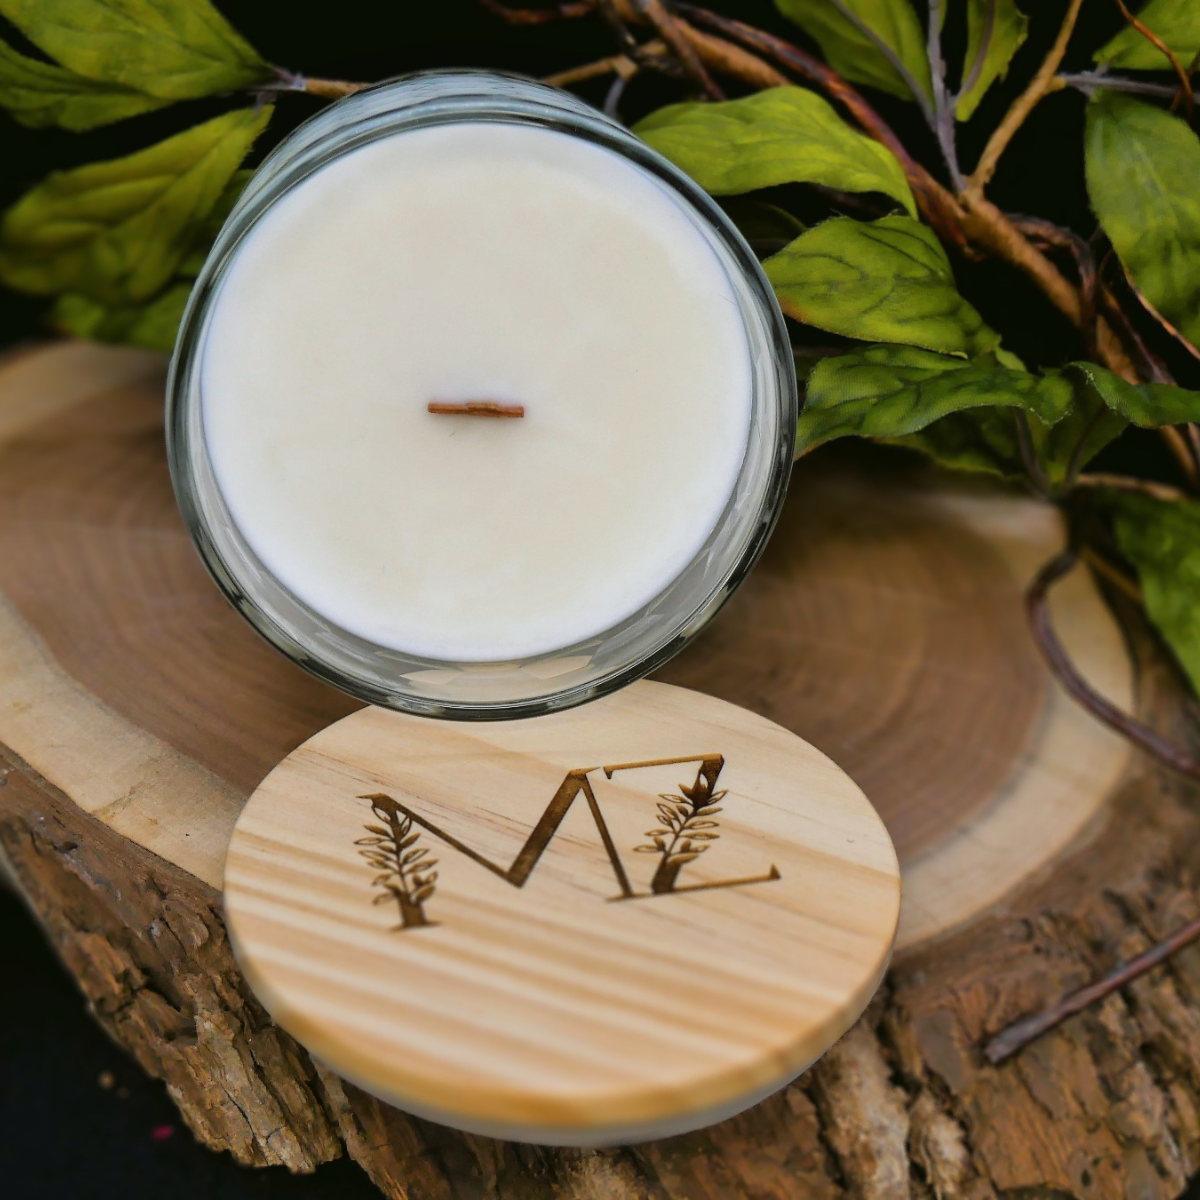 Amber Plum Wood Wick Soy Candle